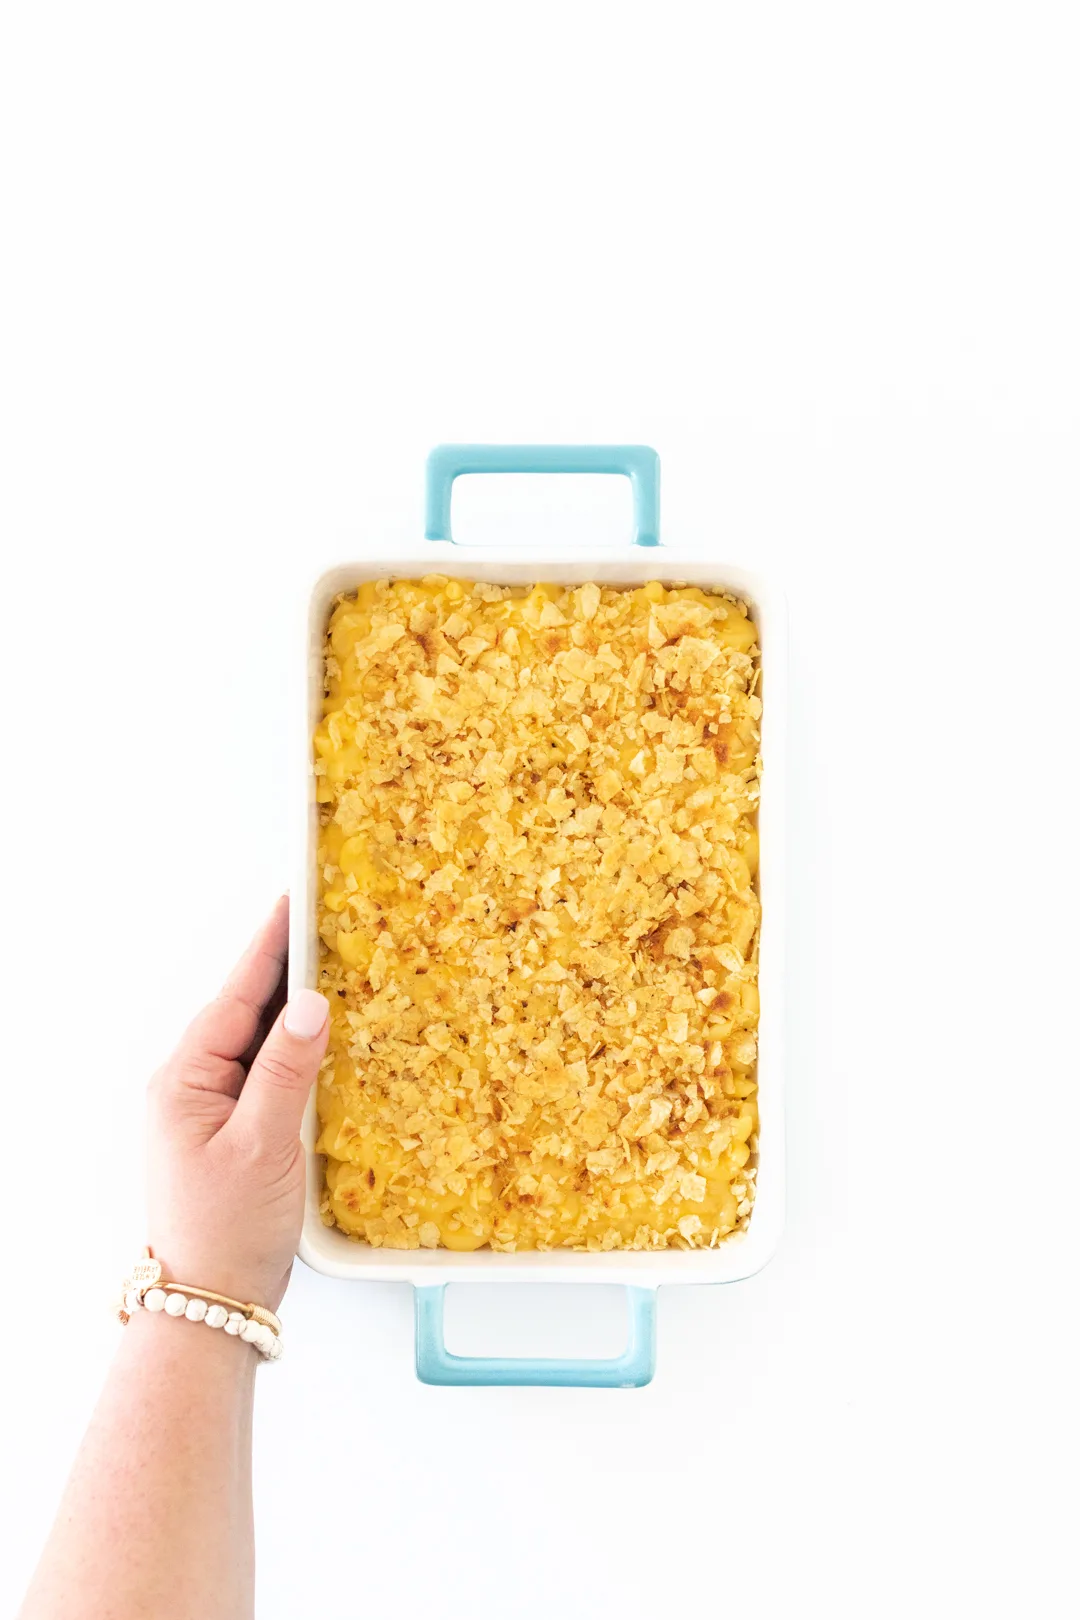 tray of baked macaroni and cheese